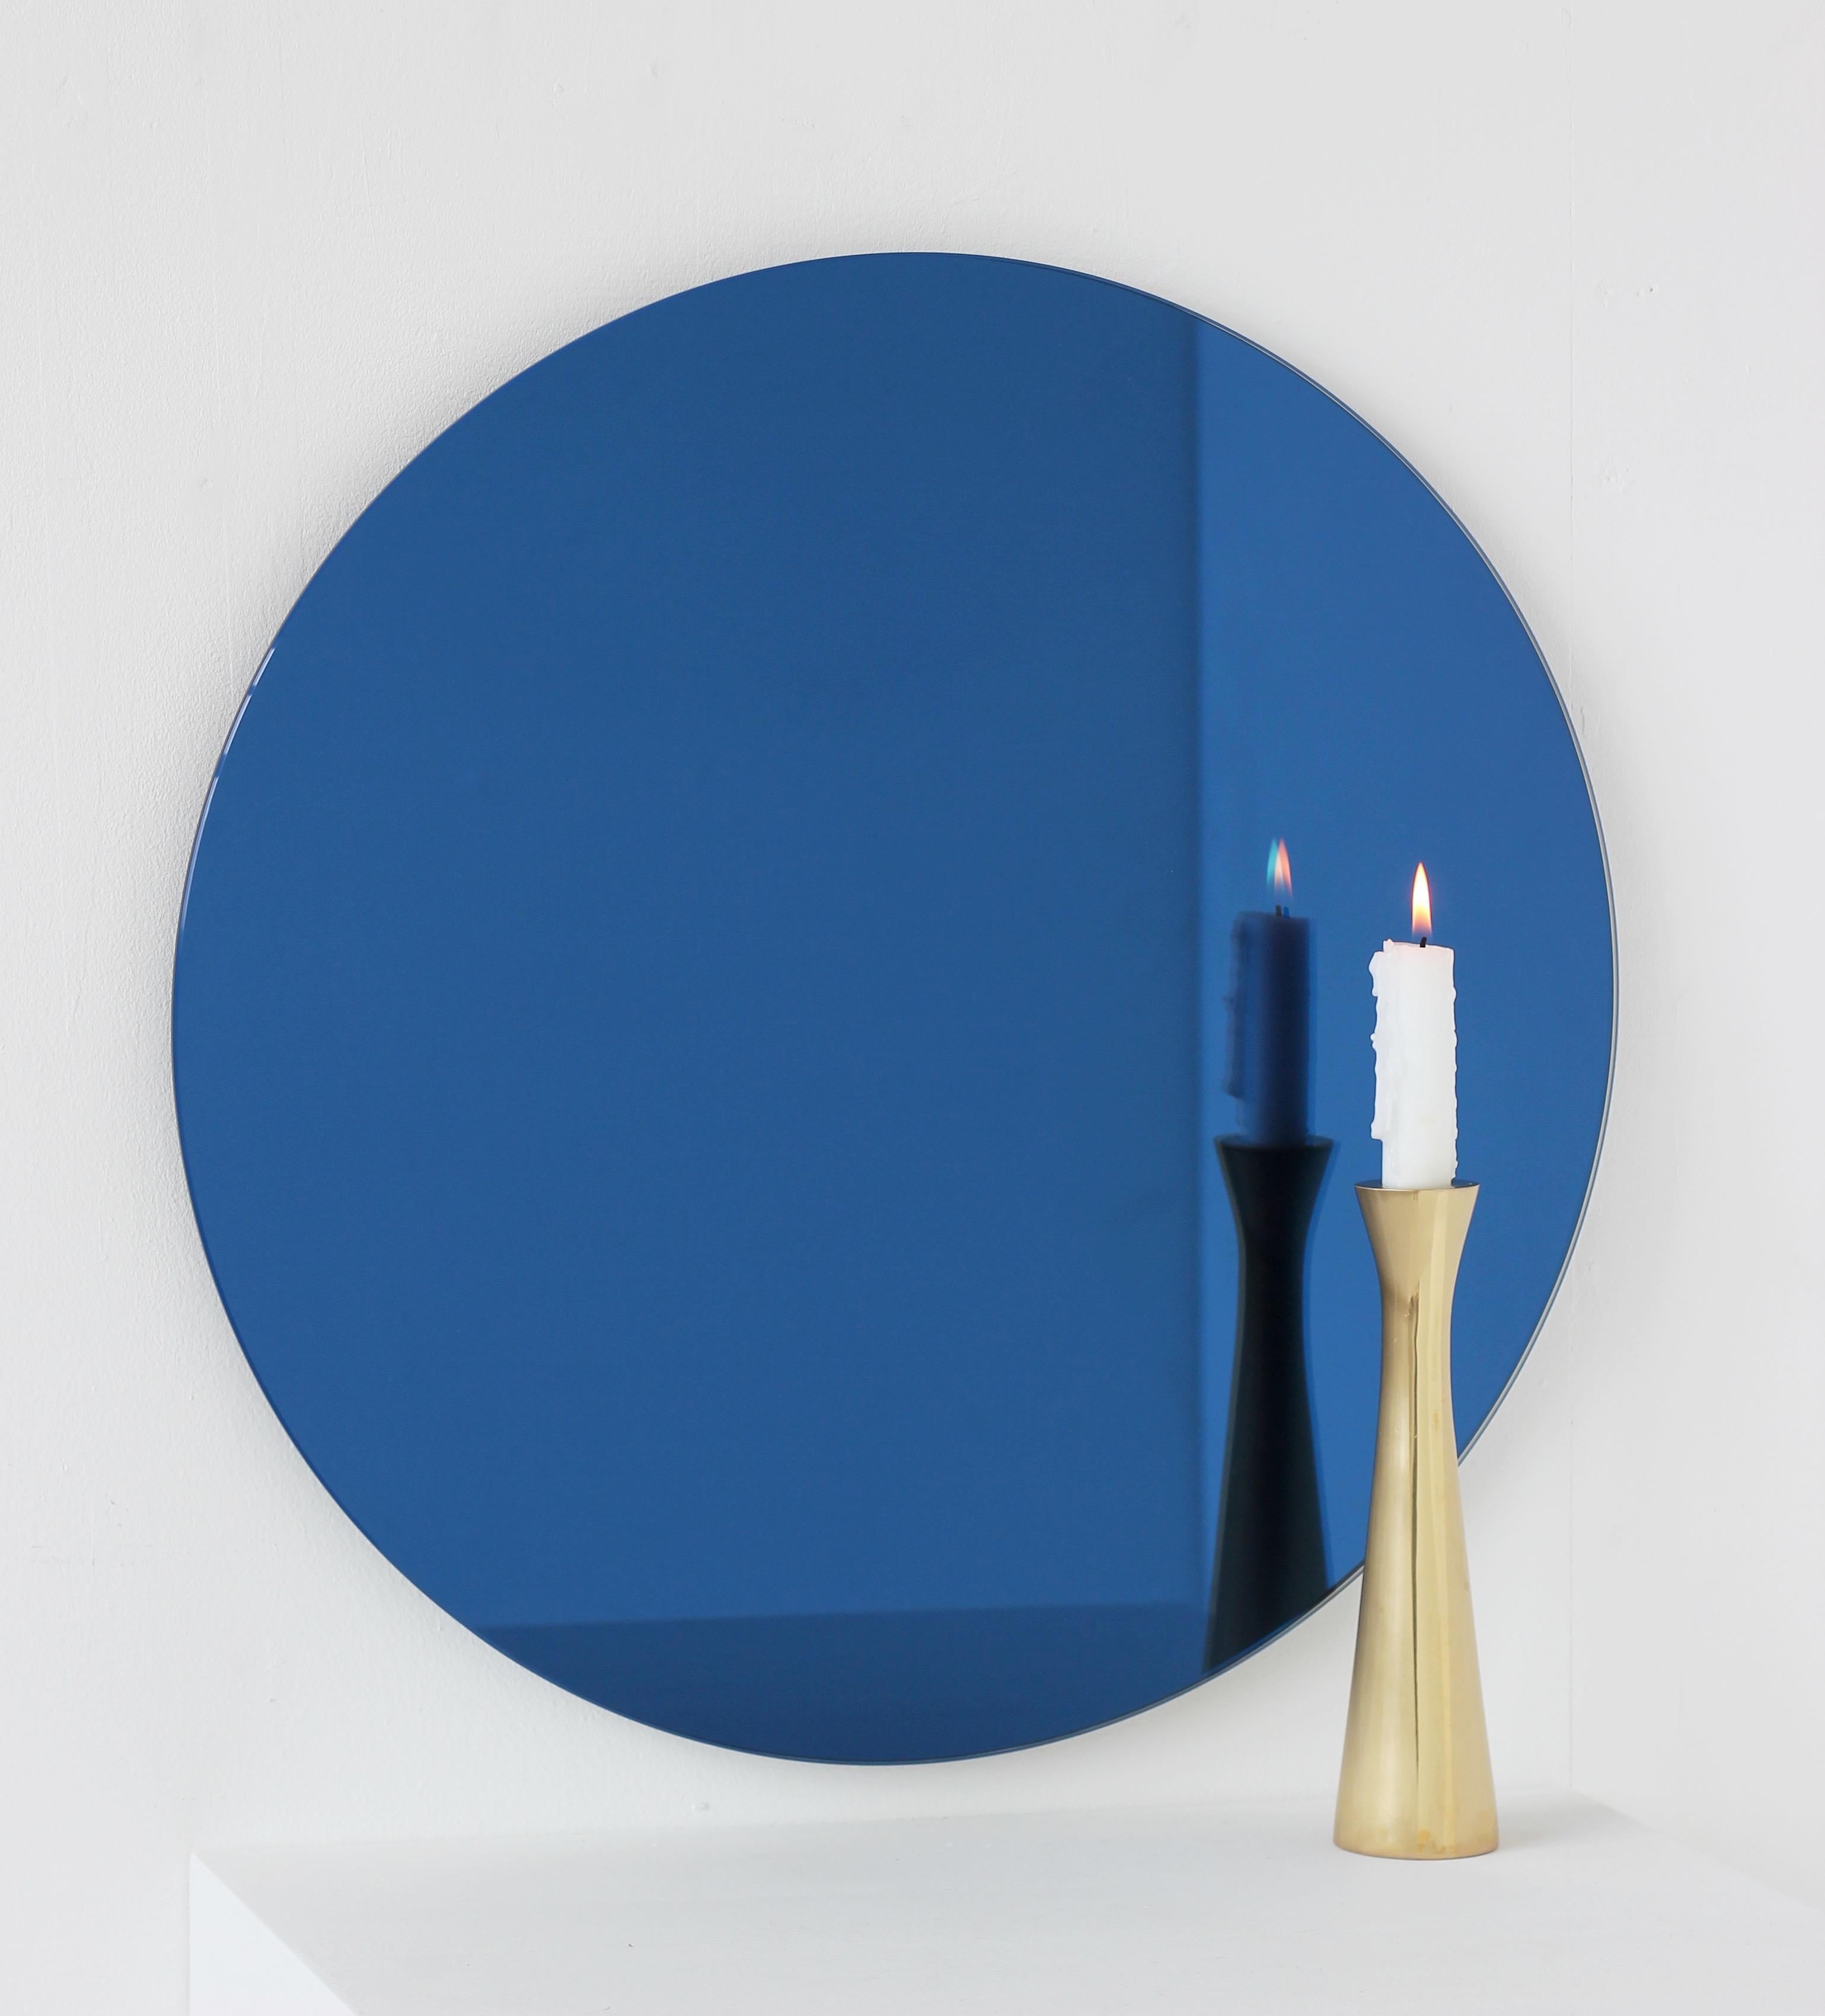 Orbis Blue Tinted Minimalist Frameless Circular Mirror, Small In New Condition For Sale In London, GB